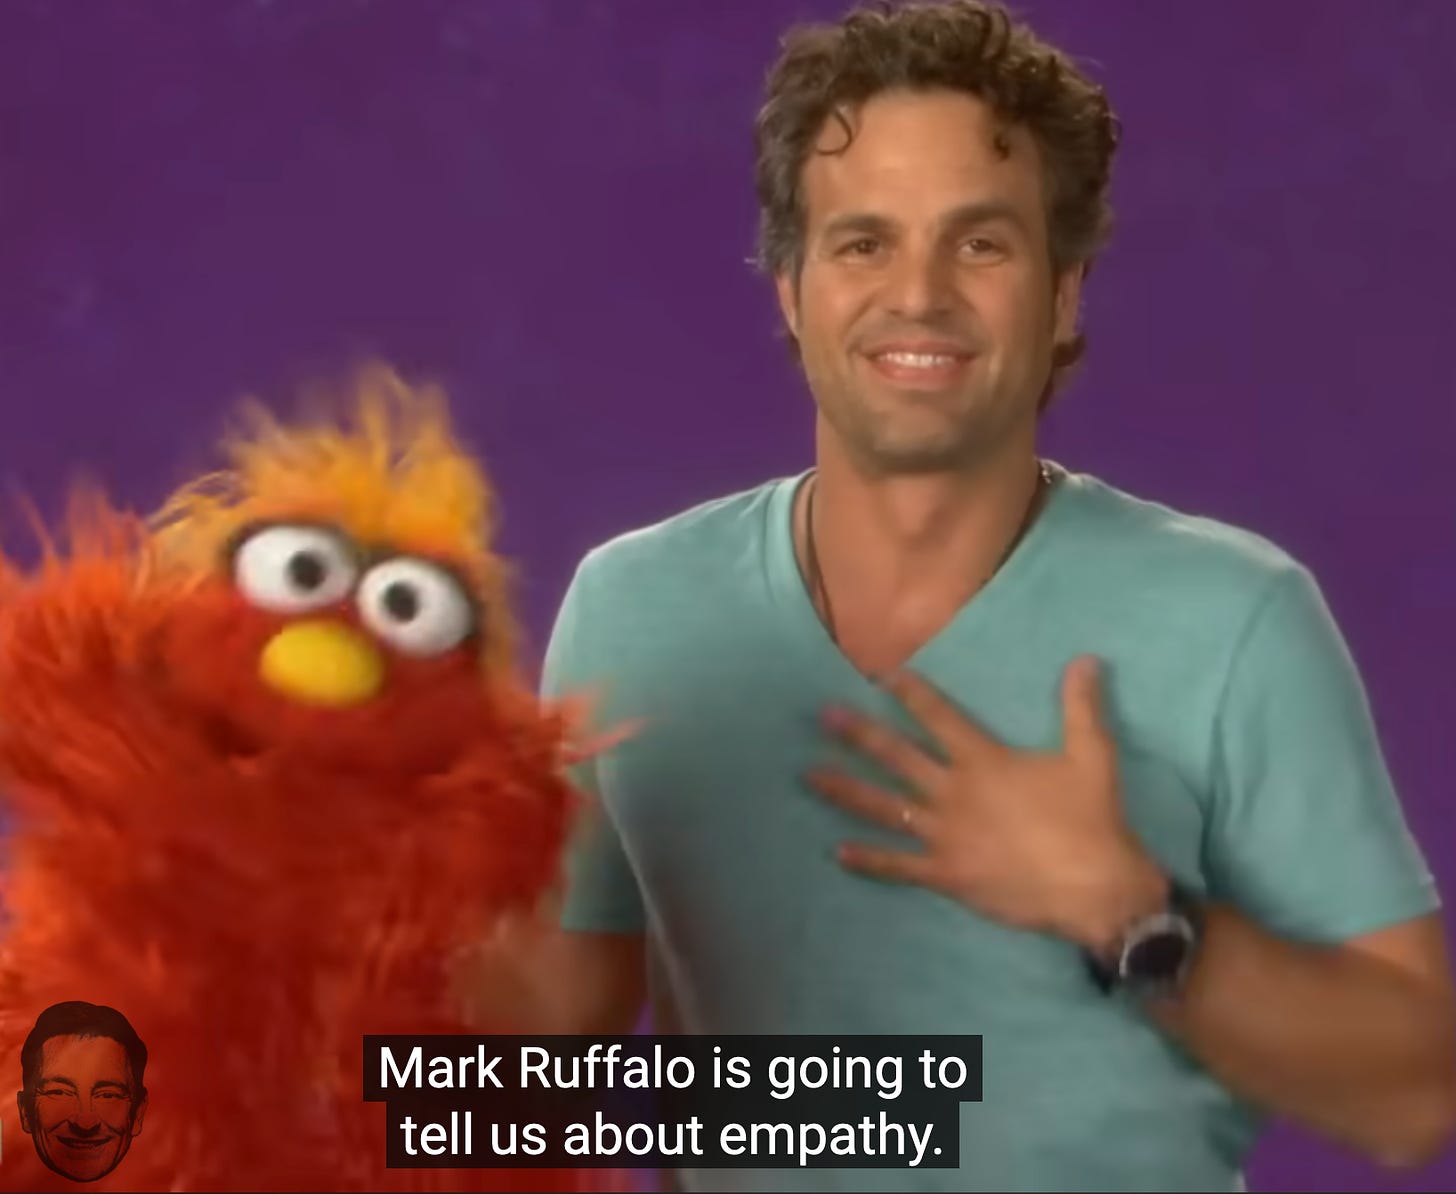 Mark Ruffalo is going to tell us about empathy.